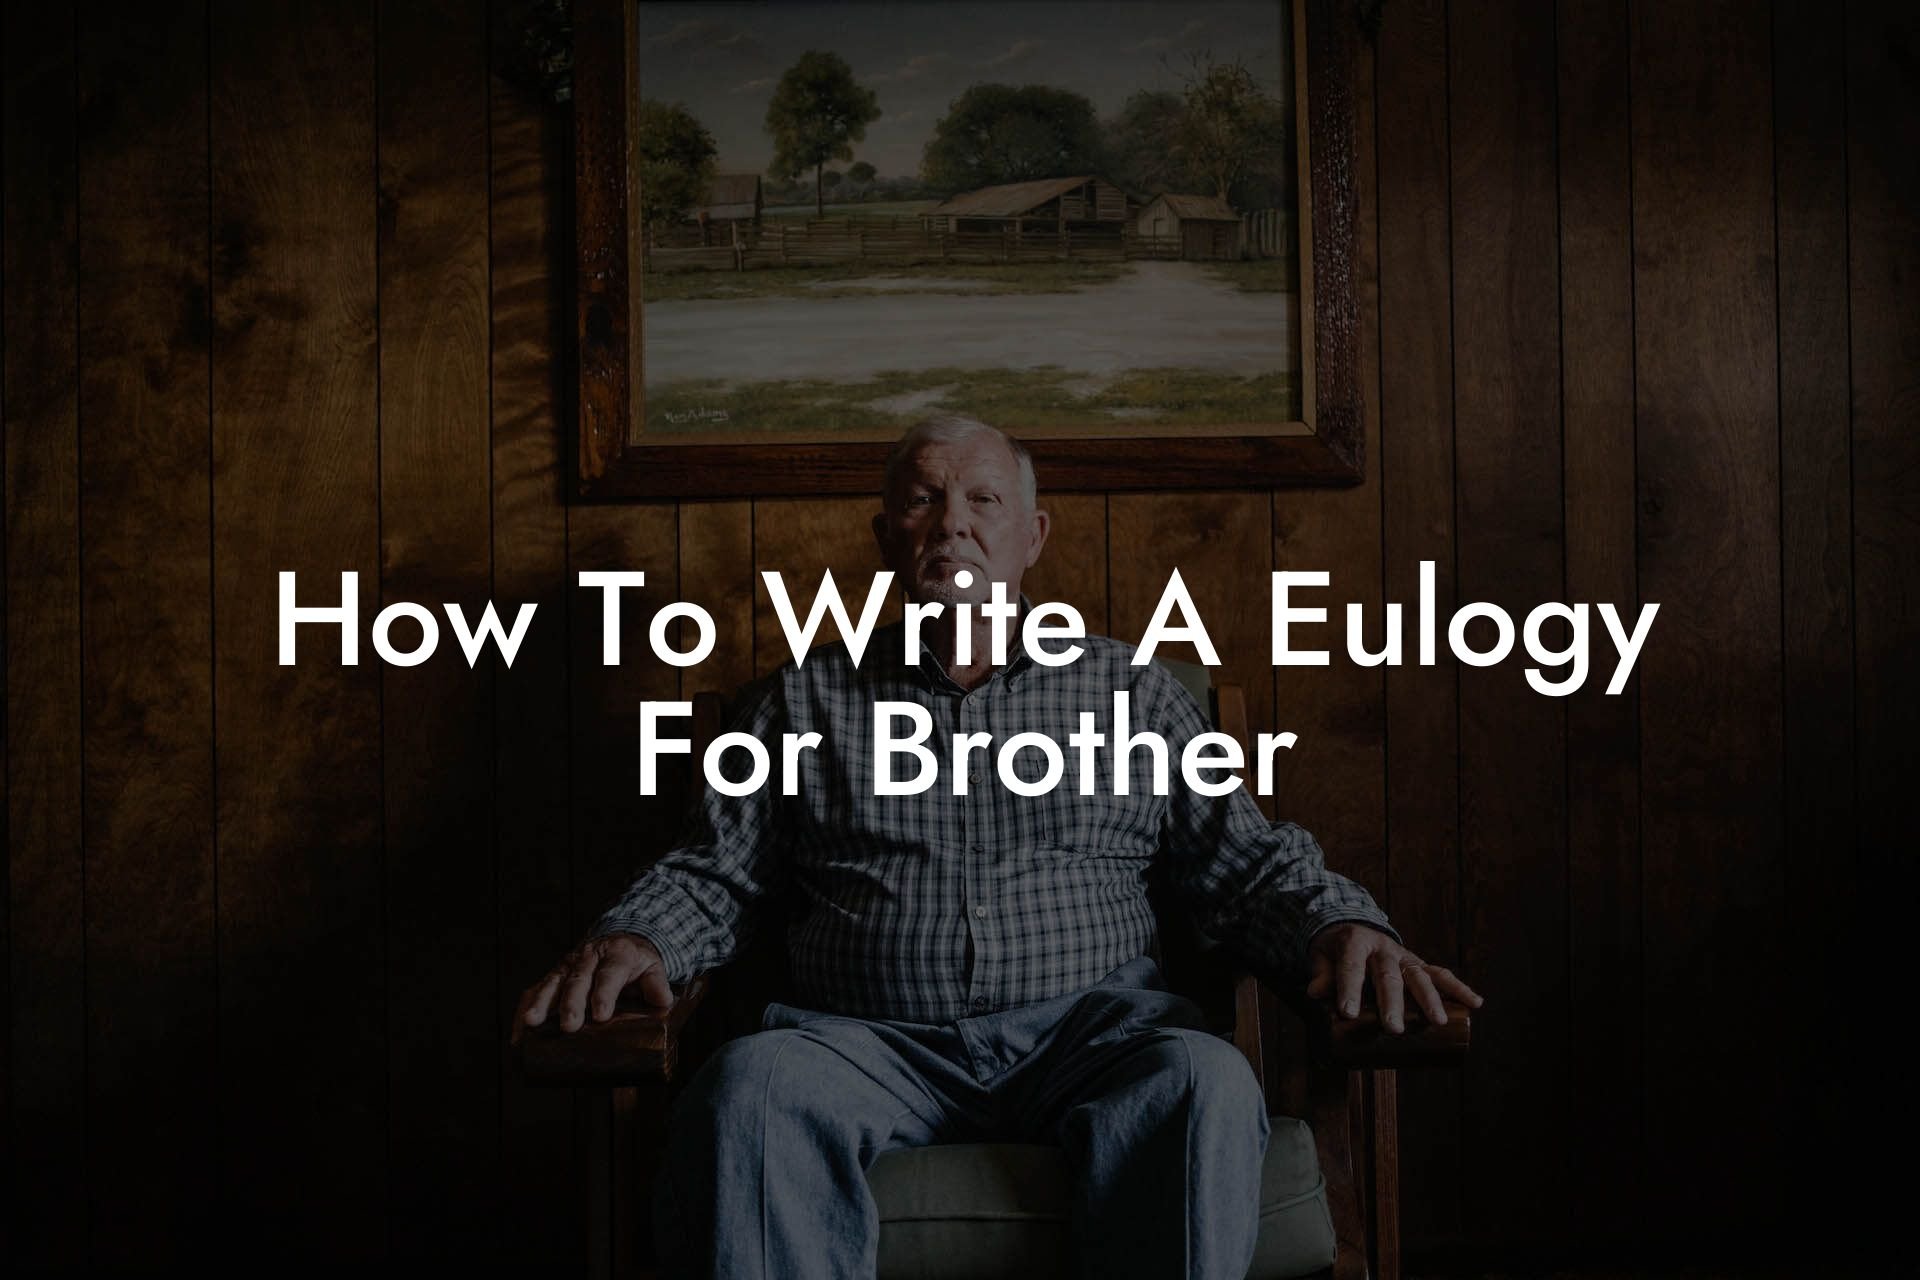 How To Write A Eulogy For Brother